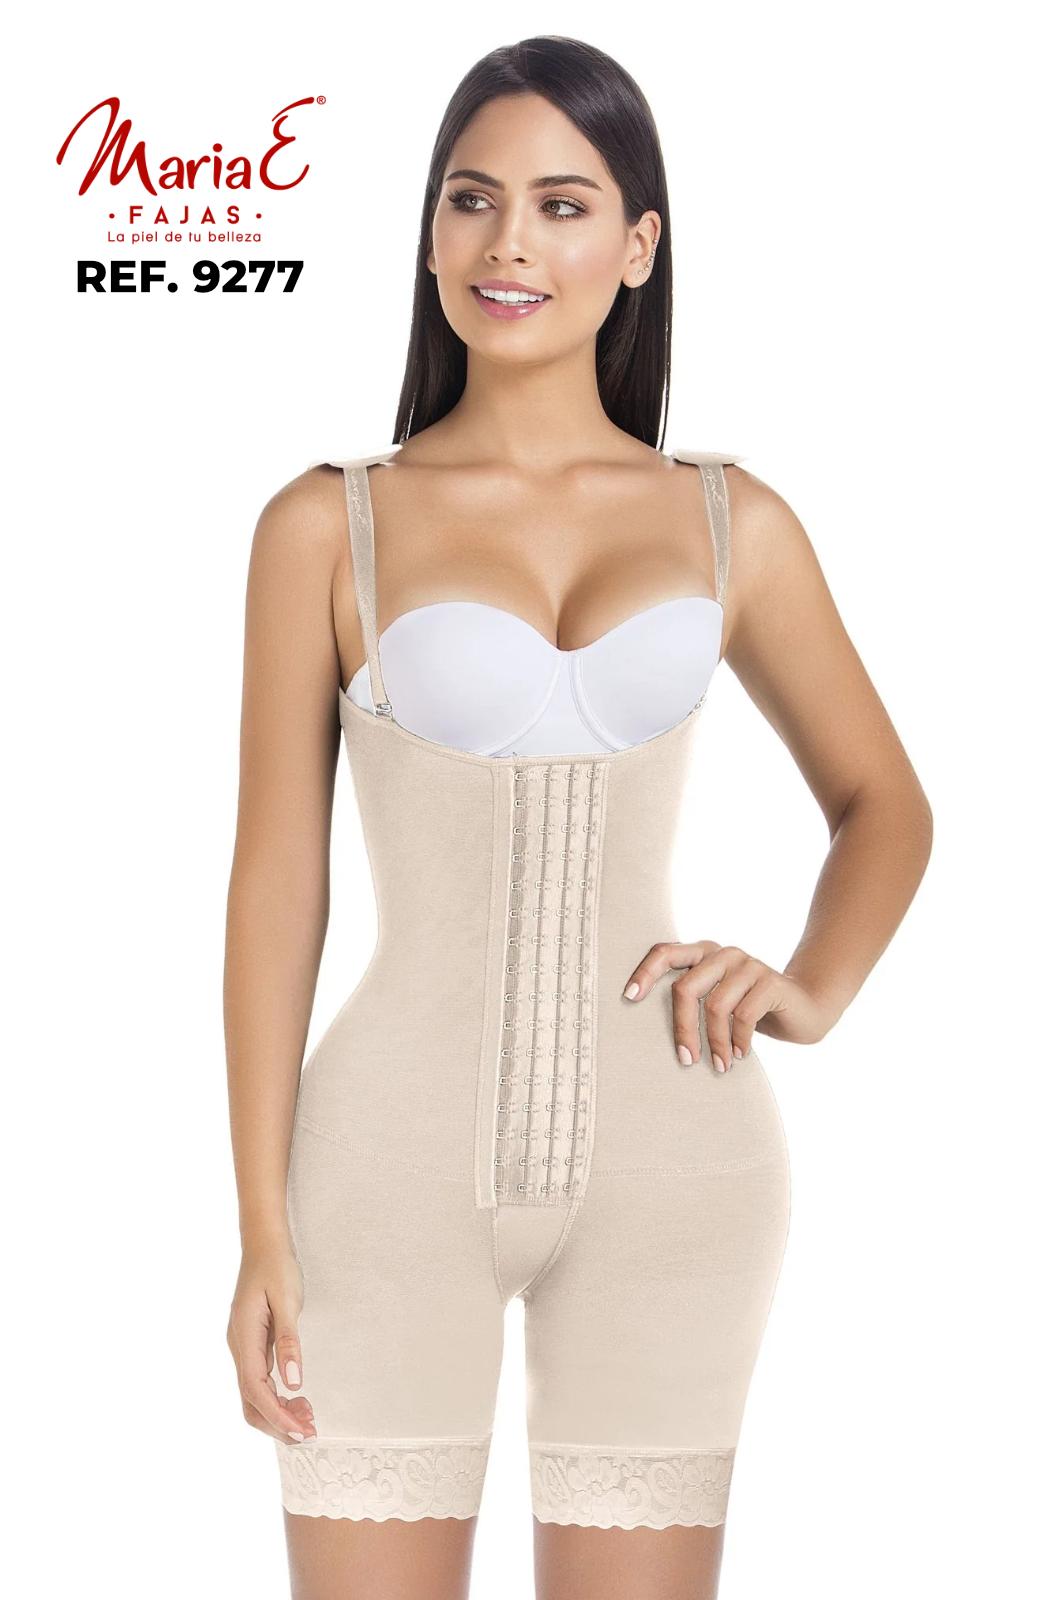 Wide hip and small waist girdle